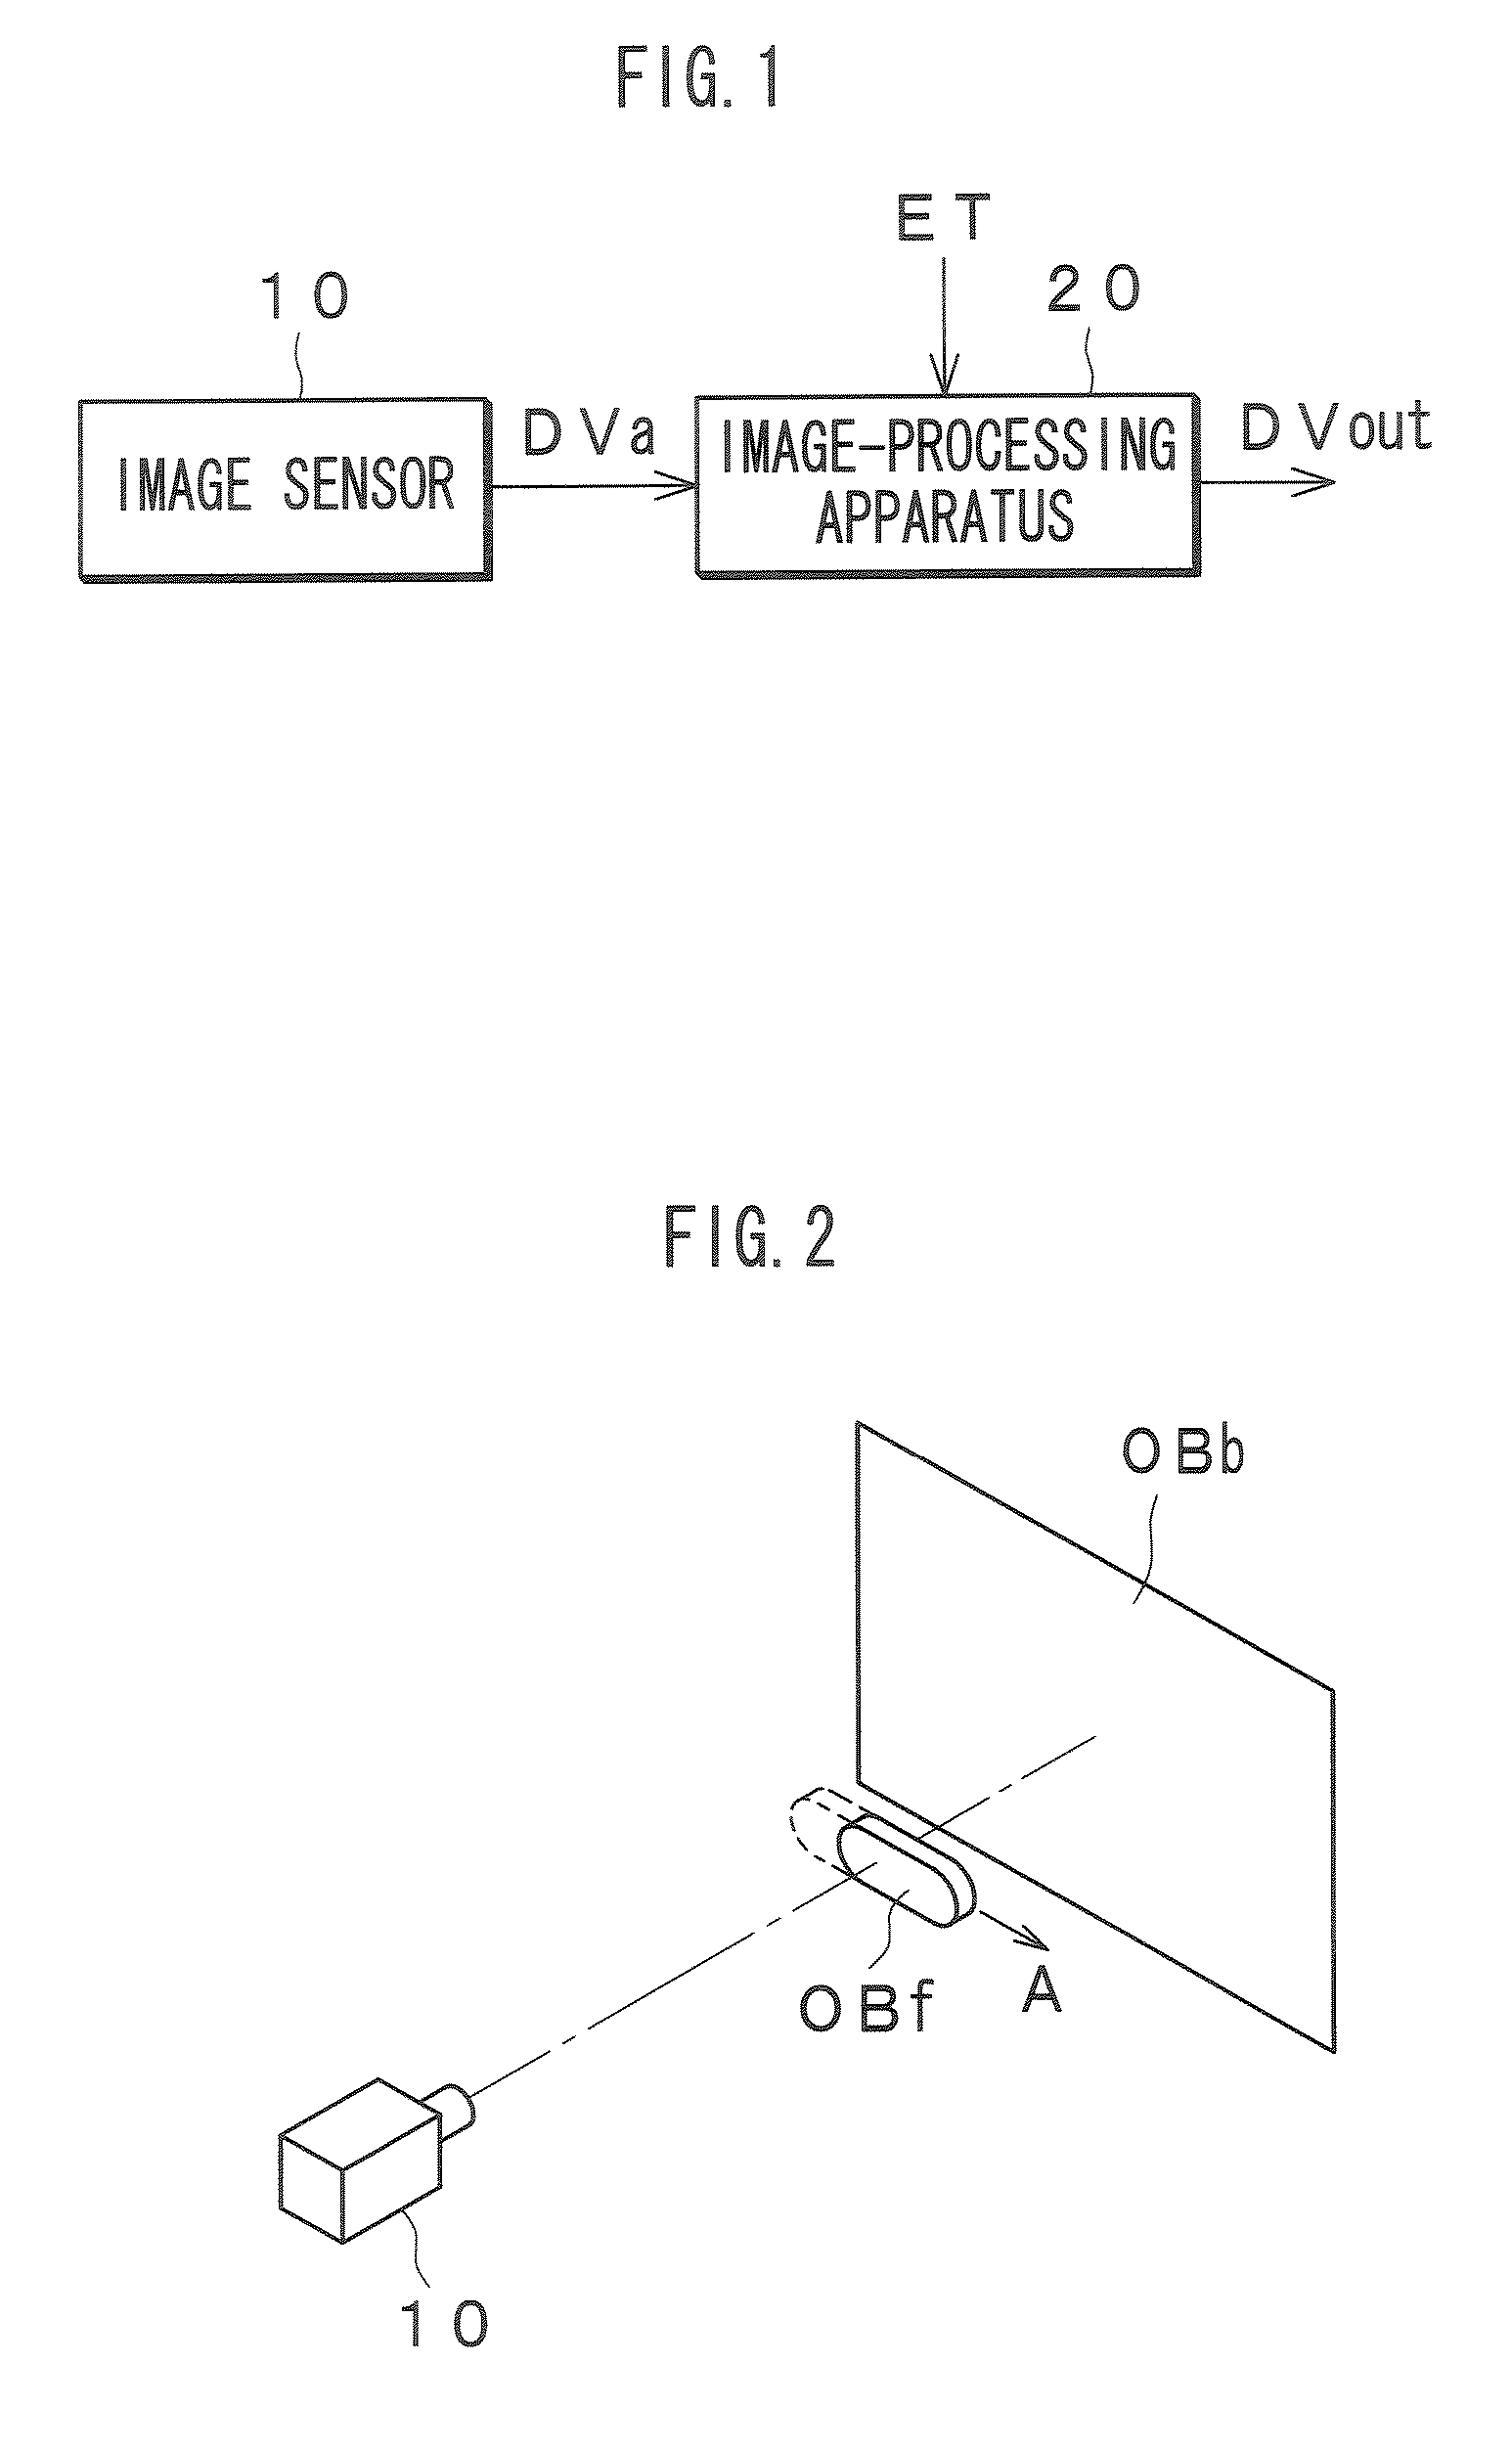 Image processing device, learning device, and coefficient generating device and method